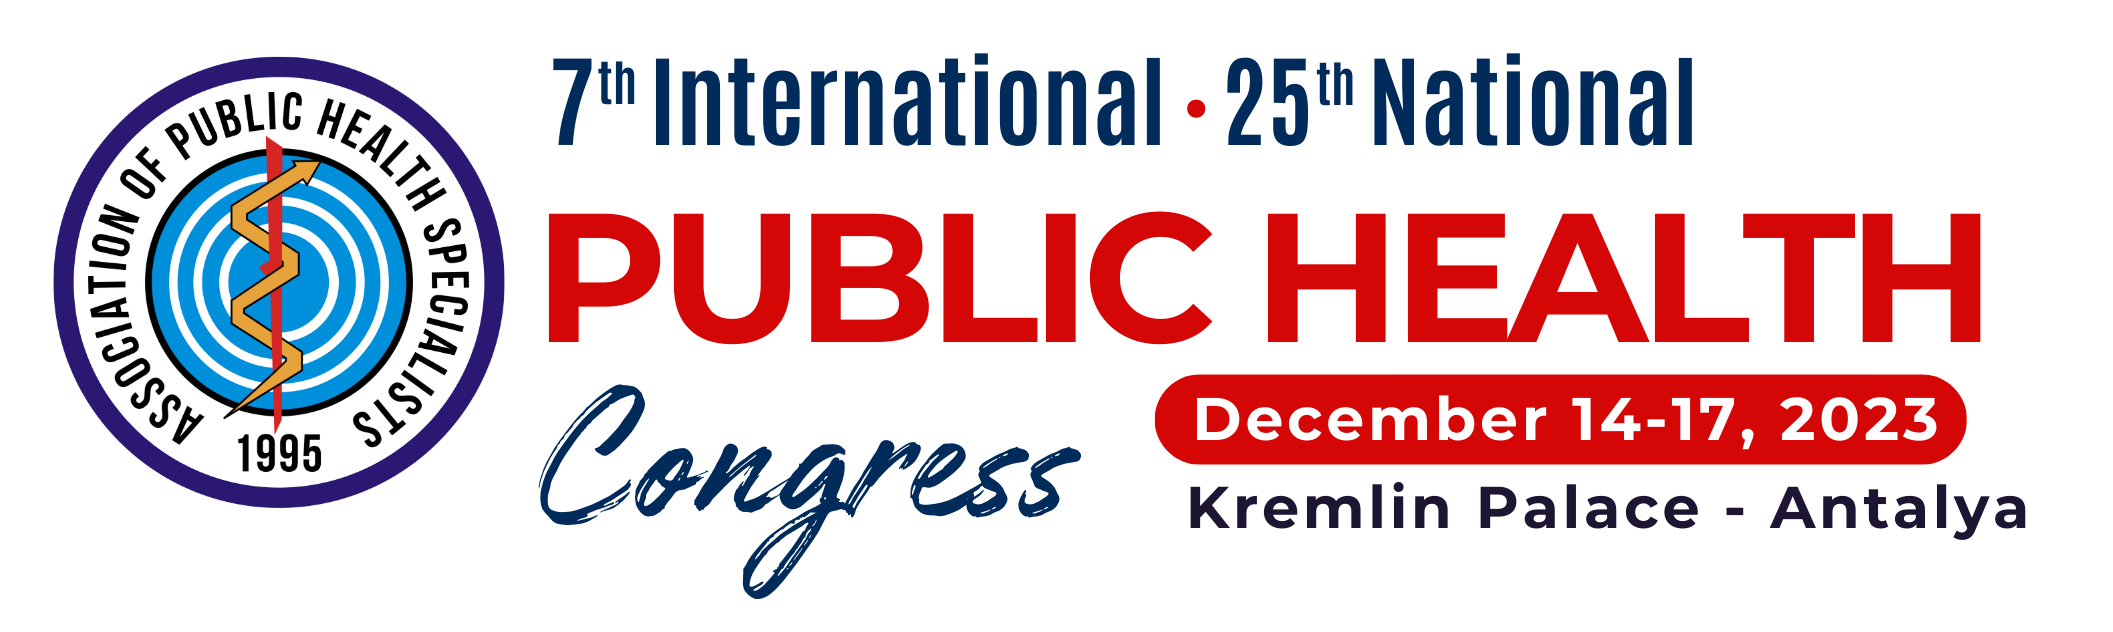 7th International and 24th National Congress on Public Health